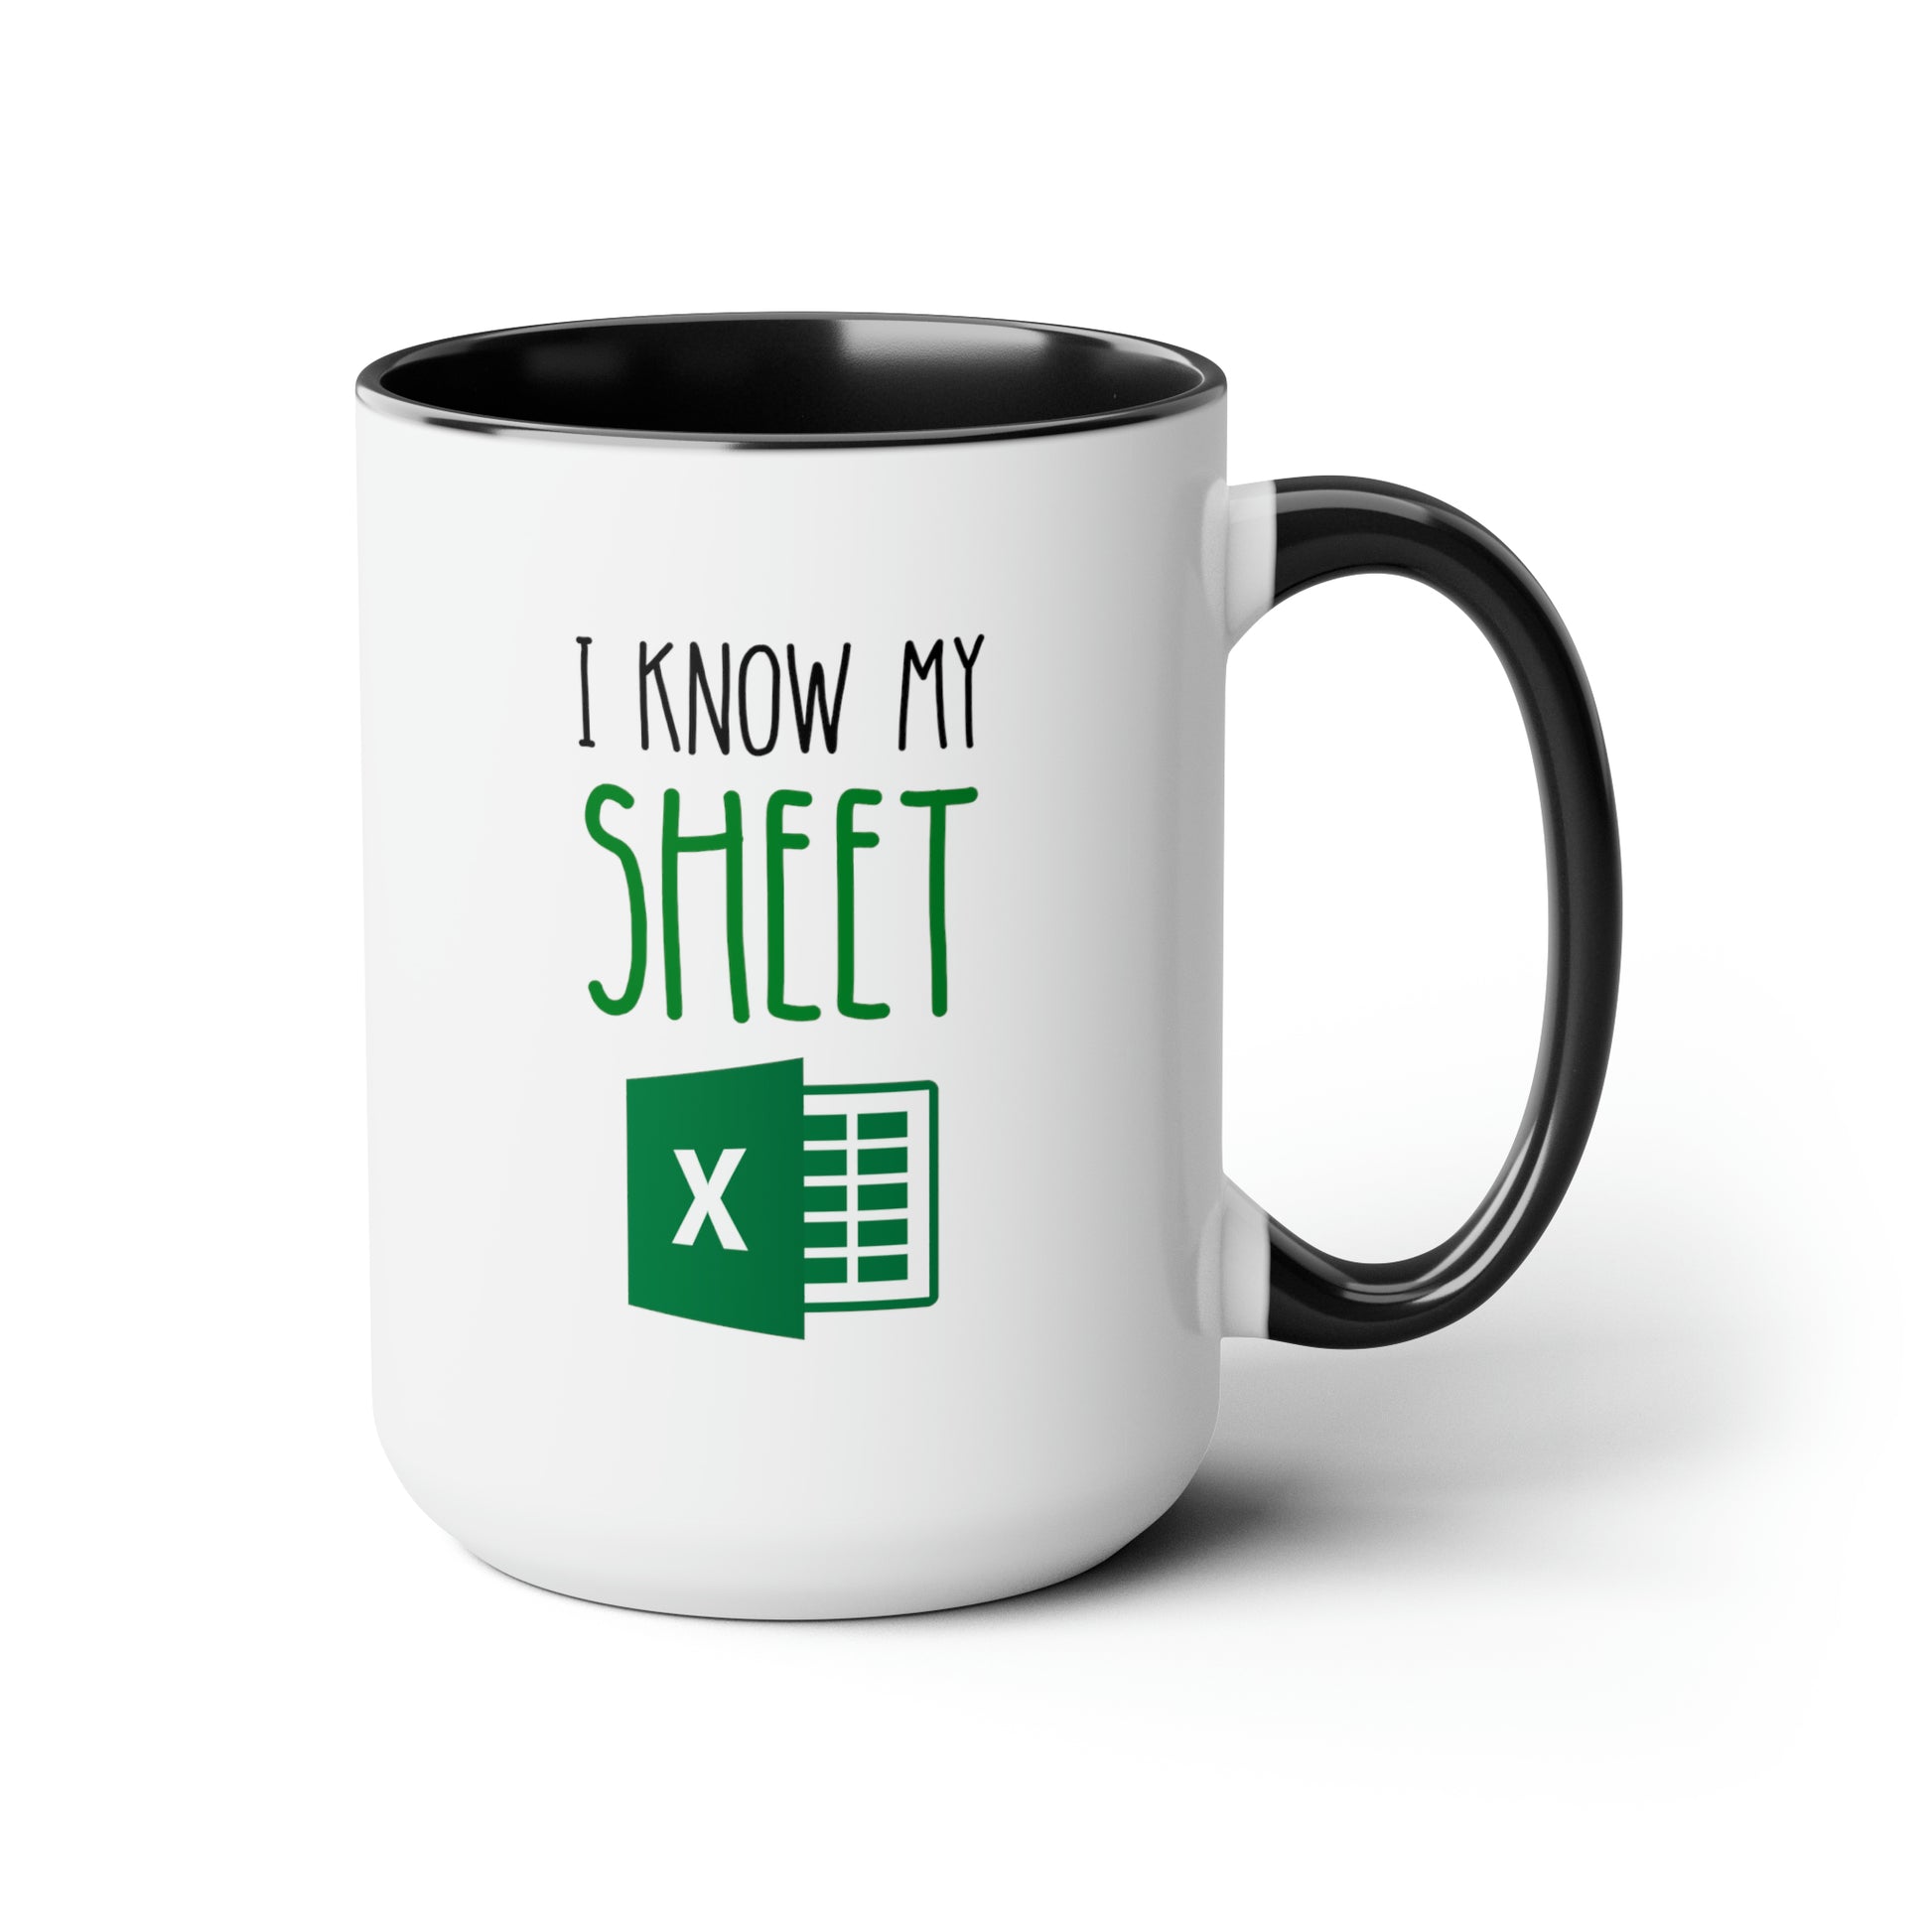 I Know My Sheet 15oz white with black accent funny large coffee mug gift for work colleague spreadsheet accountant office coworker excel waveywares wavey wares wavywares wavy wares